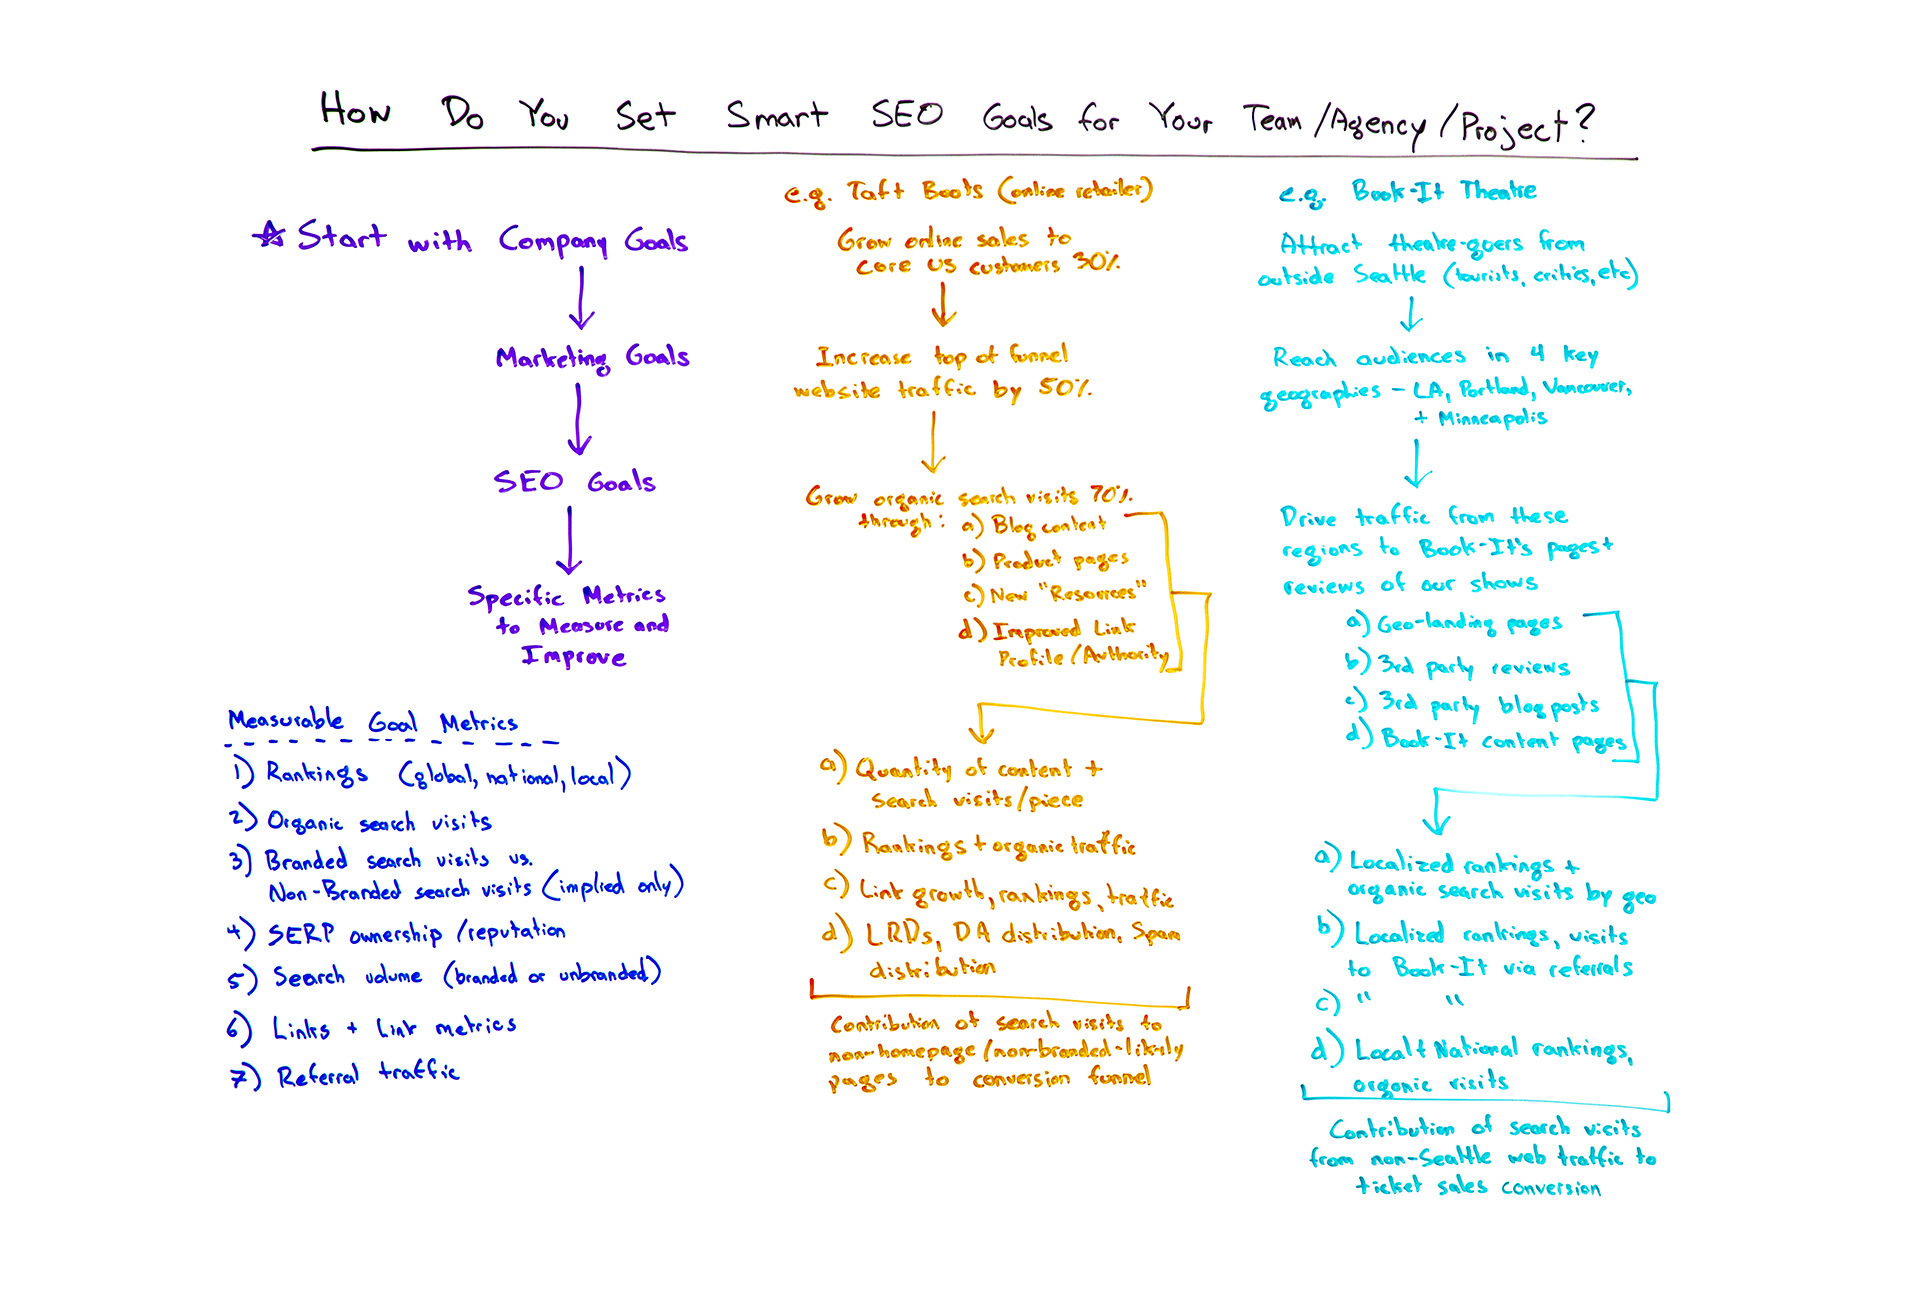 Setting Smart SEO Goals for Your Team, Agency, or Project